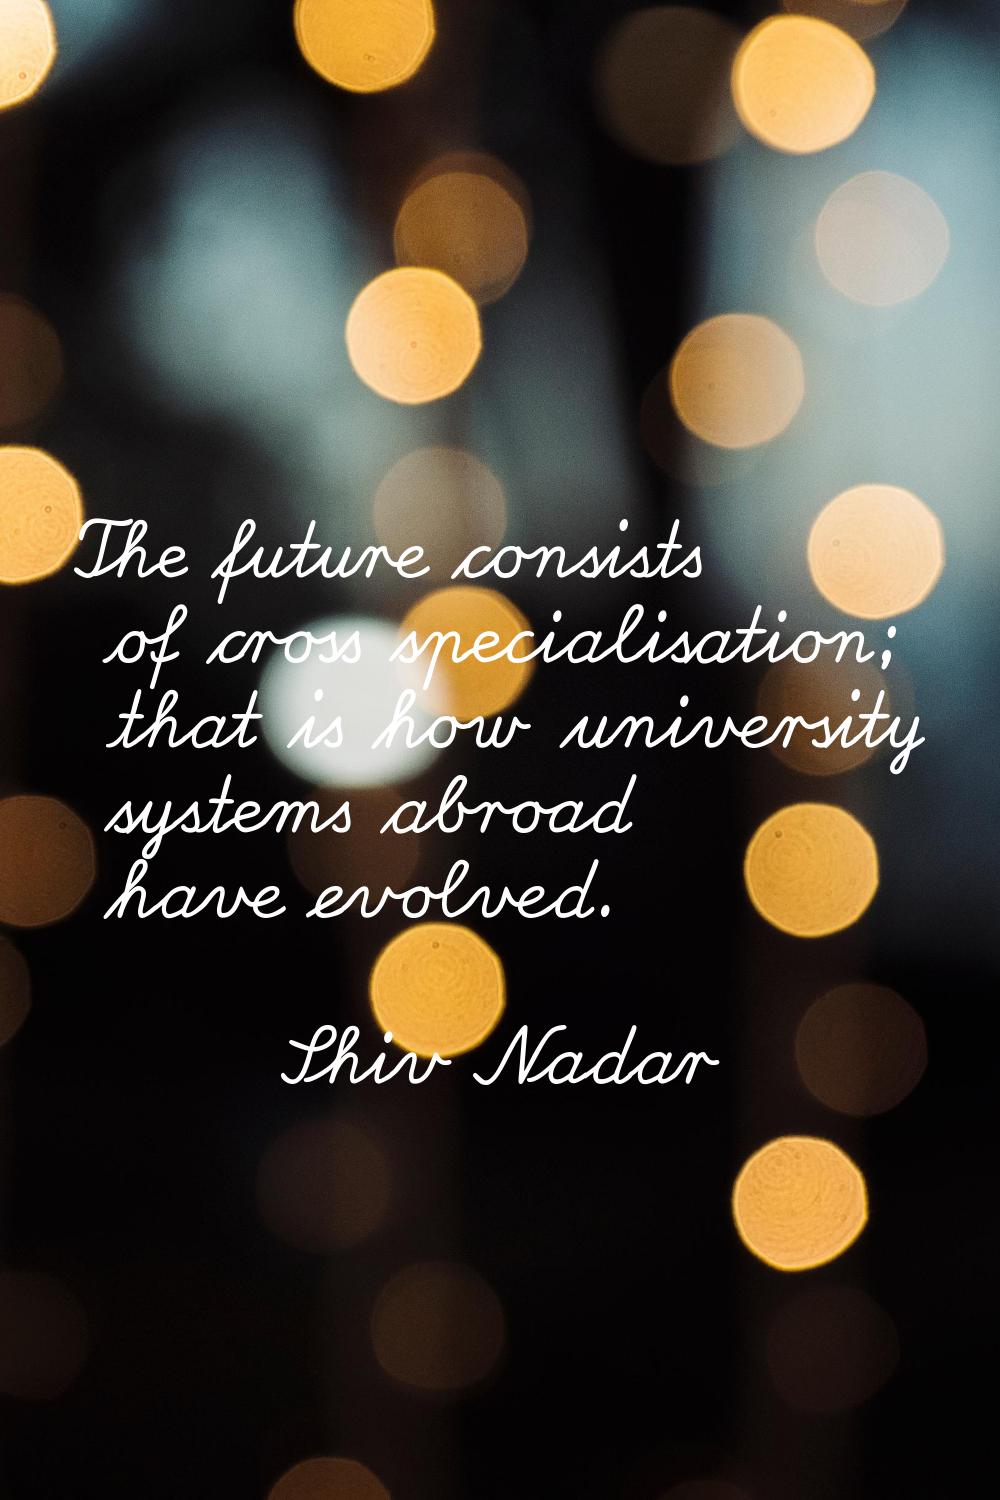 The future consists of cross specialisation; that is how university systems abroad have evolved.